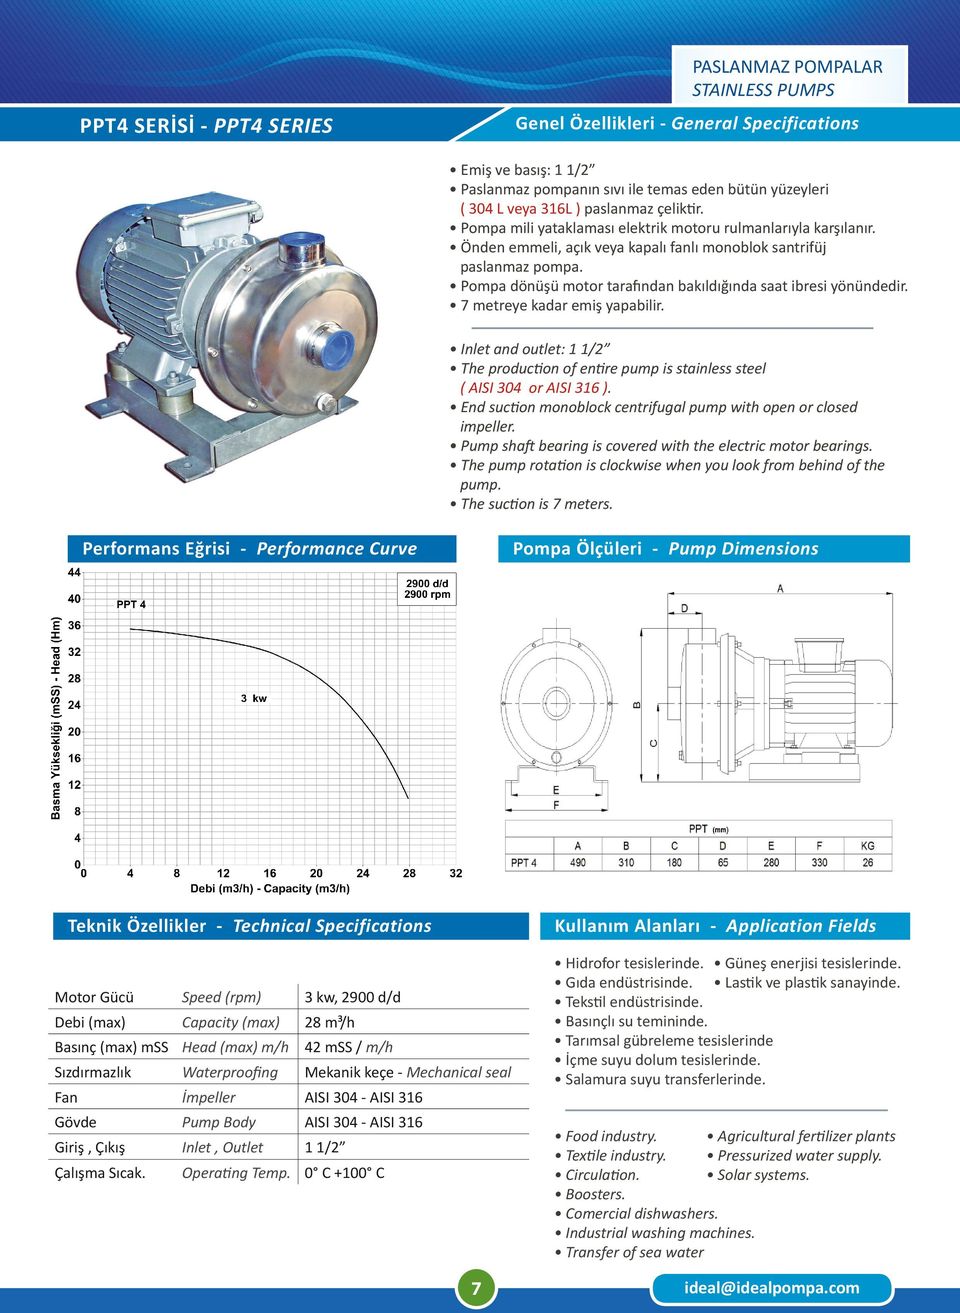 End suction monoblock centrifugal pump with open or closed impeller. Pump shaft bearing is covered with the electric motor bearings.